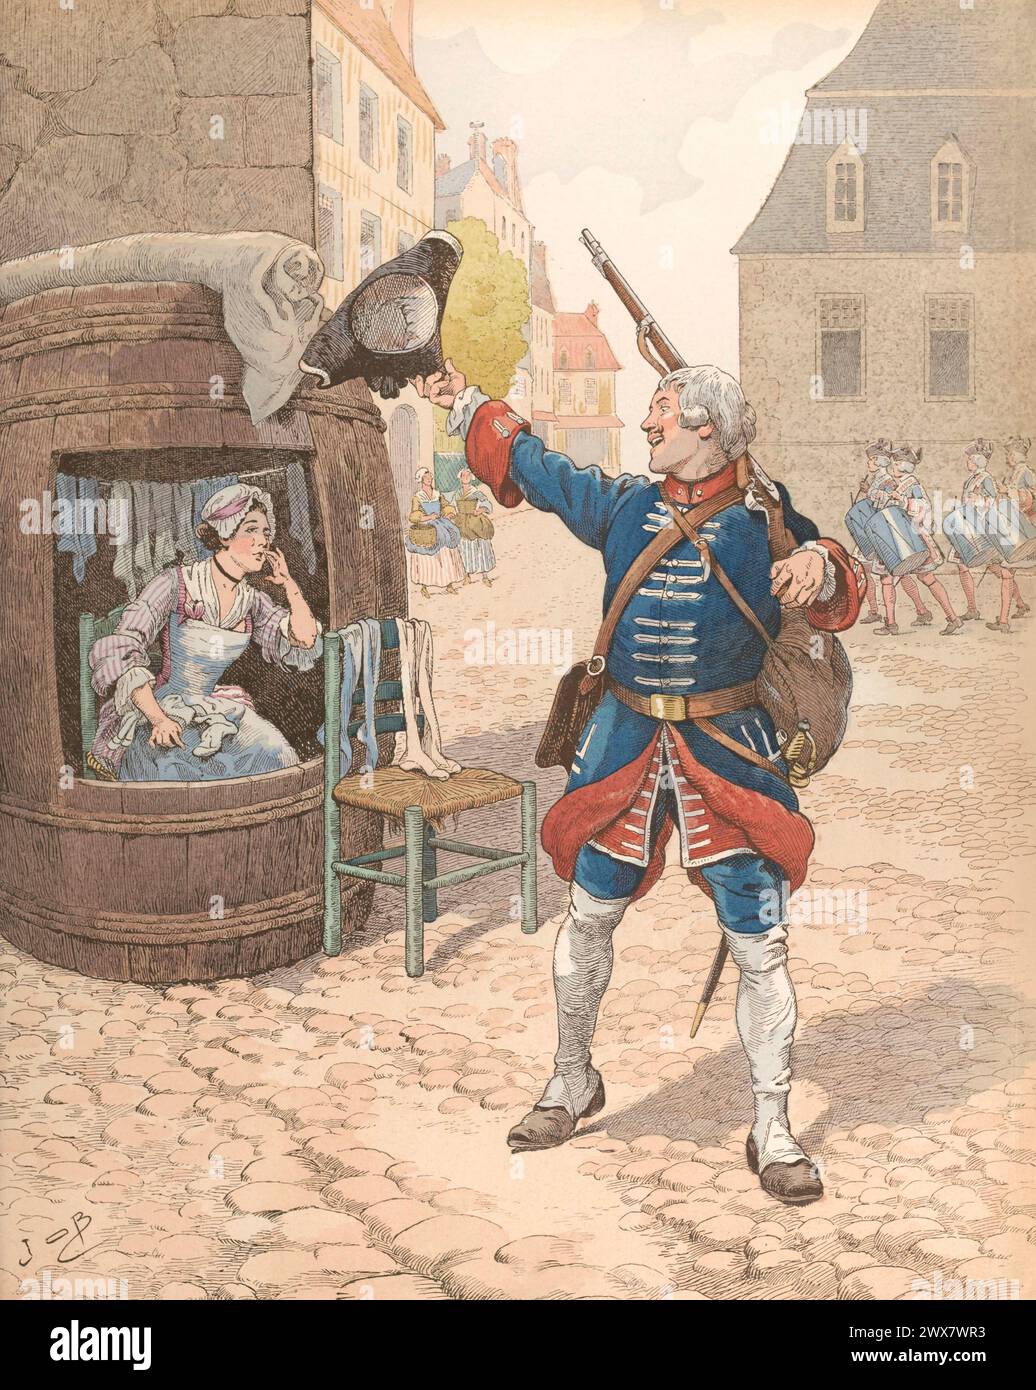 Fanfan la Tulipe in soldier's uniform during the reign of Louis XV, King of France (18th century).  Illustration by Job published in the book 'Allons, Enfants de la Patrie !...' by Jean Richepin. Published by A. Mame et fils in 1920. Stock Photo